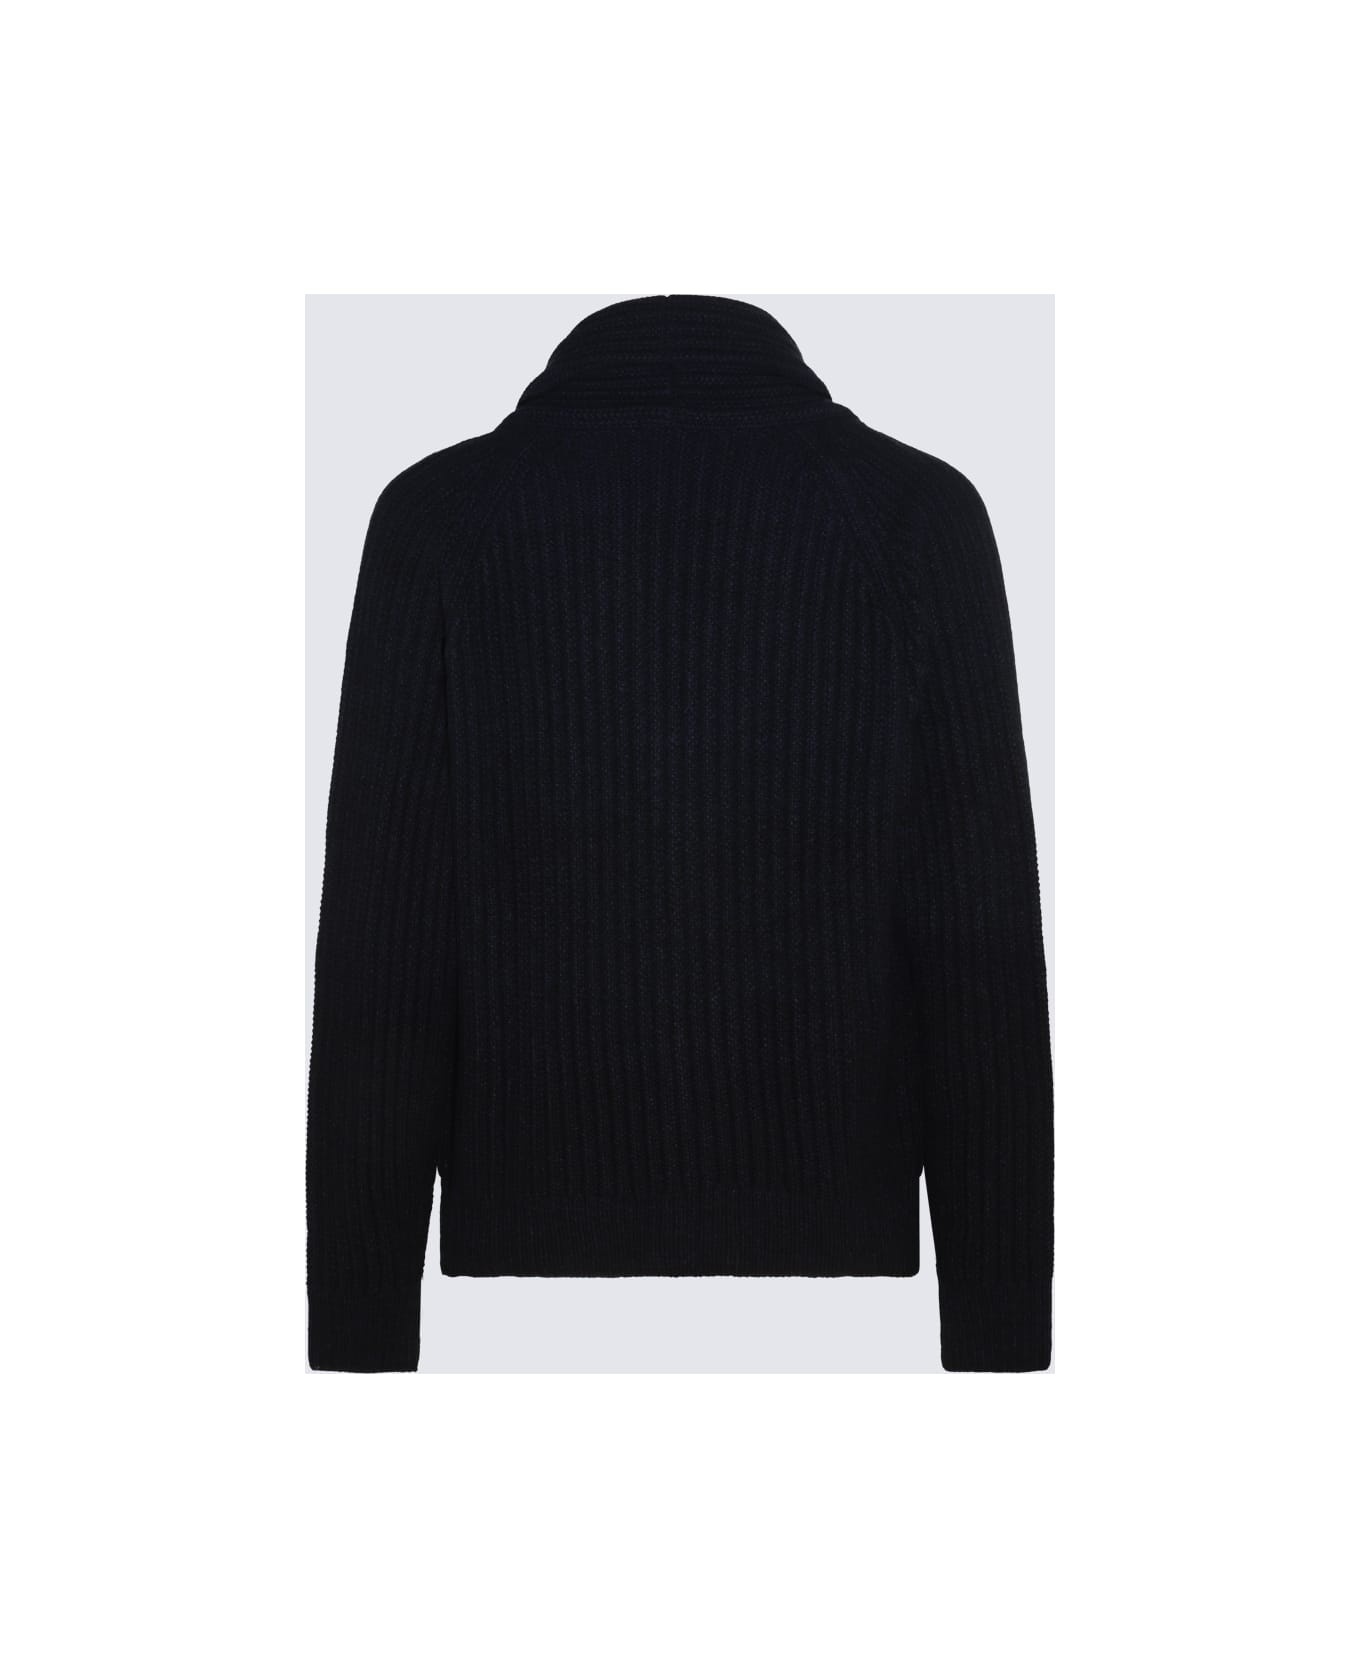 Brioni Navy Wool And Cashmere Blend Sweater - Blue